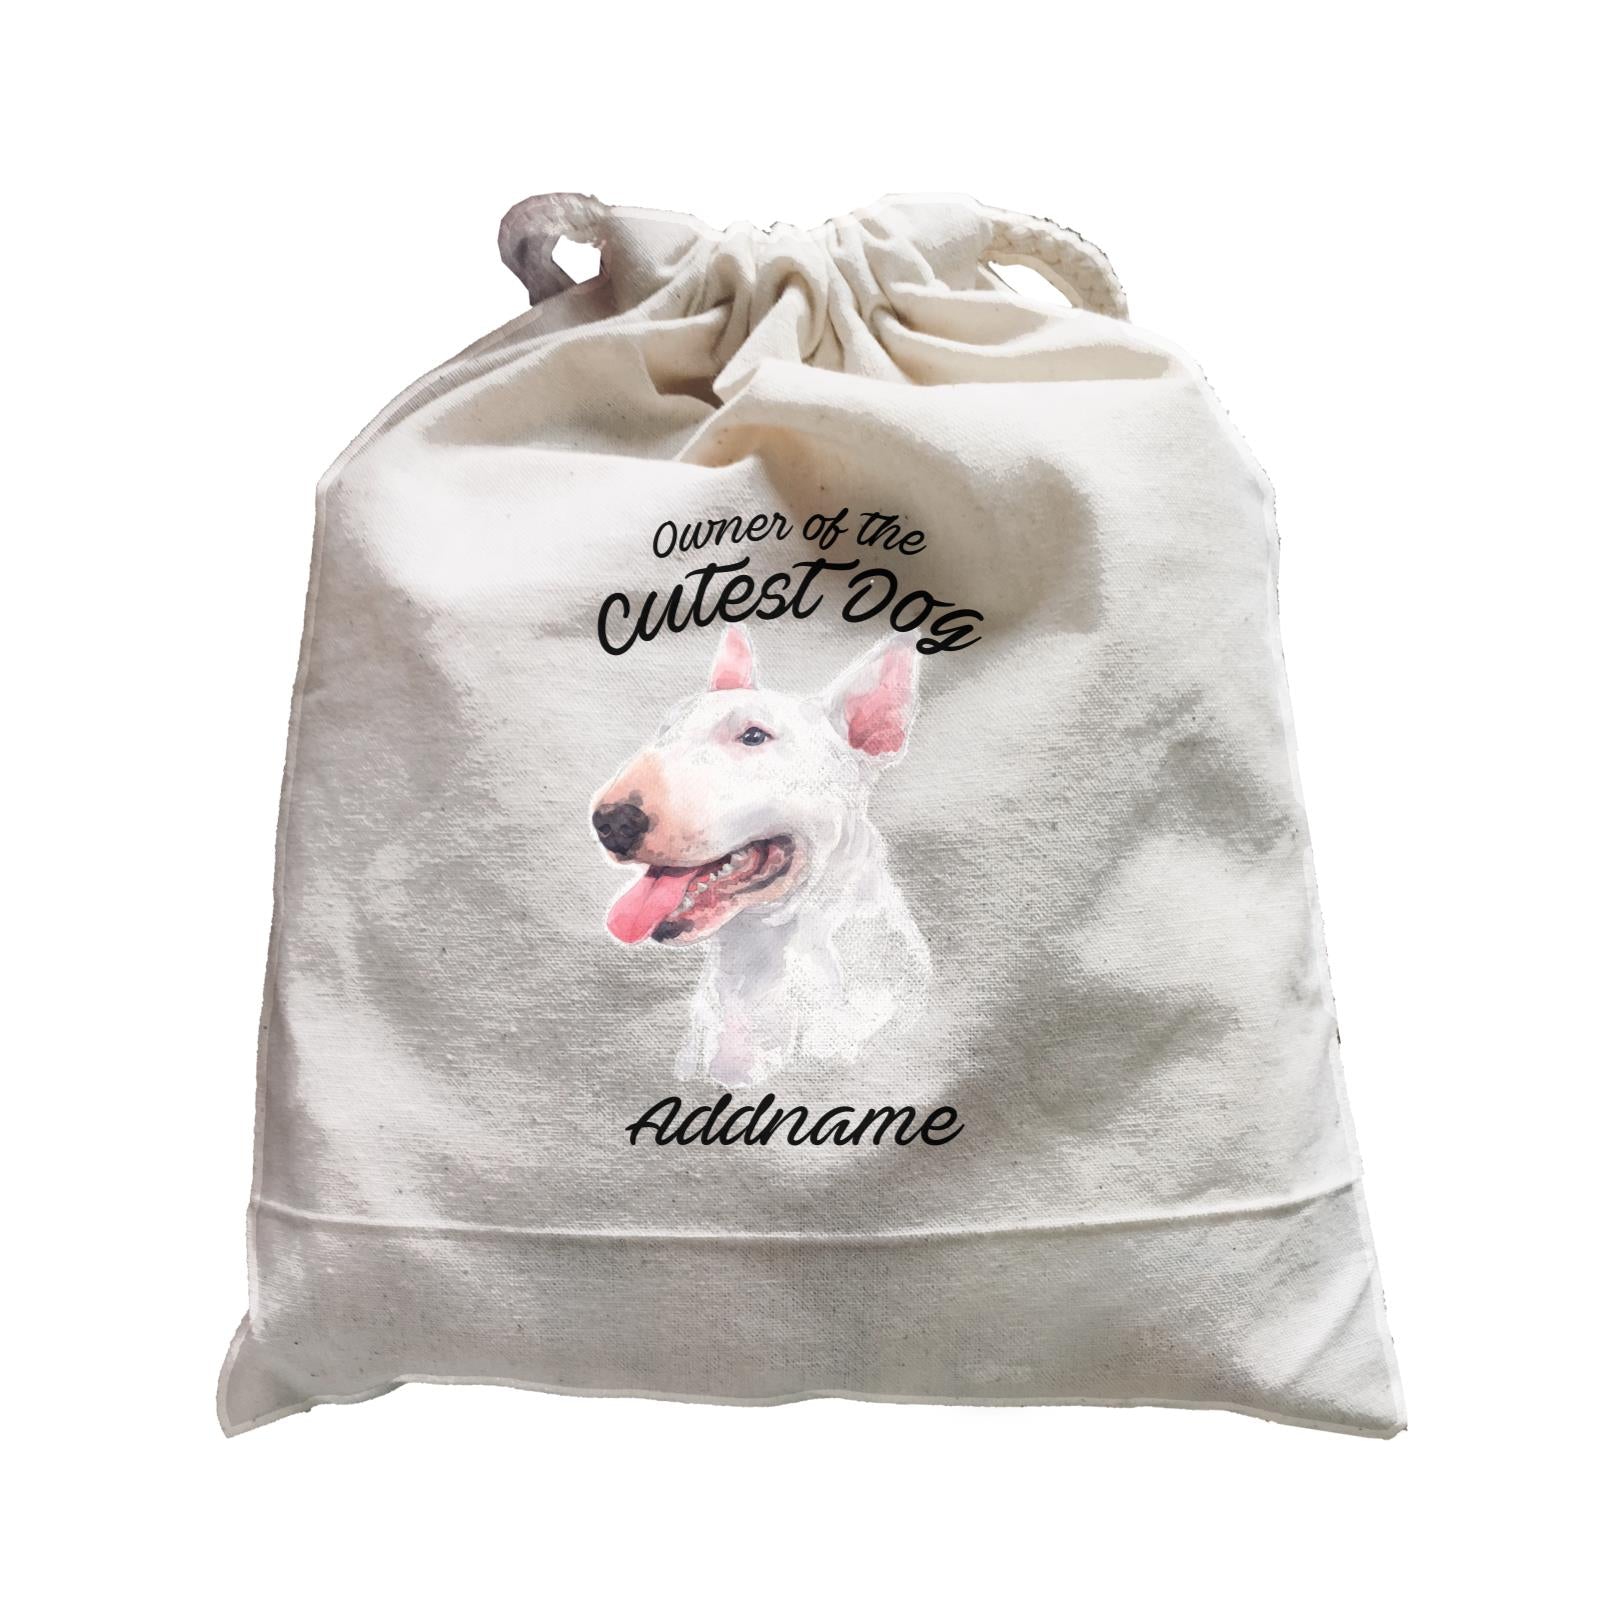 Watercolor Dog Owner Of The Cutest Dog Bull Terrier Addname Satchel